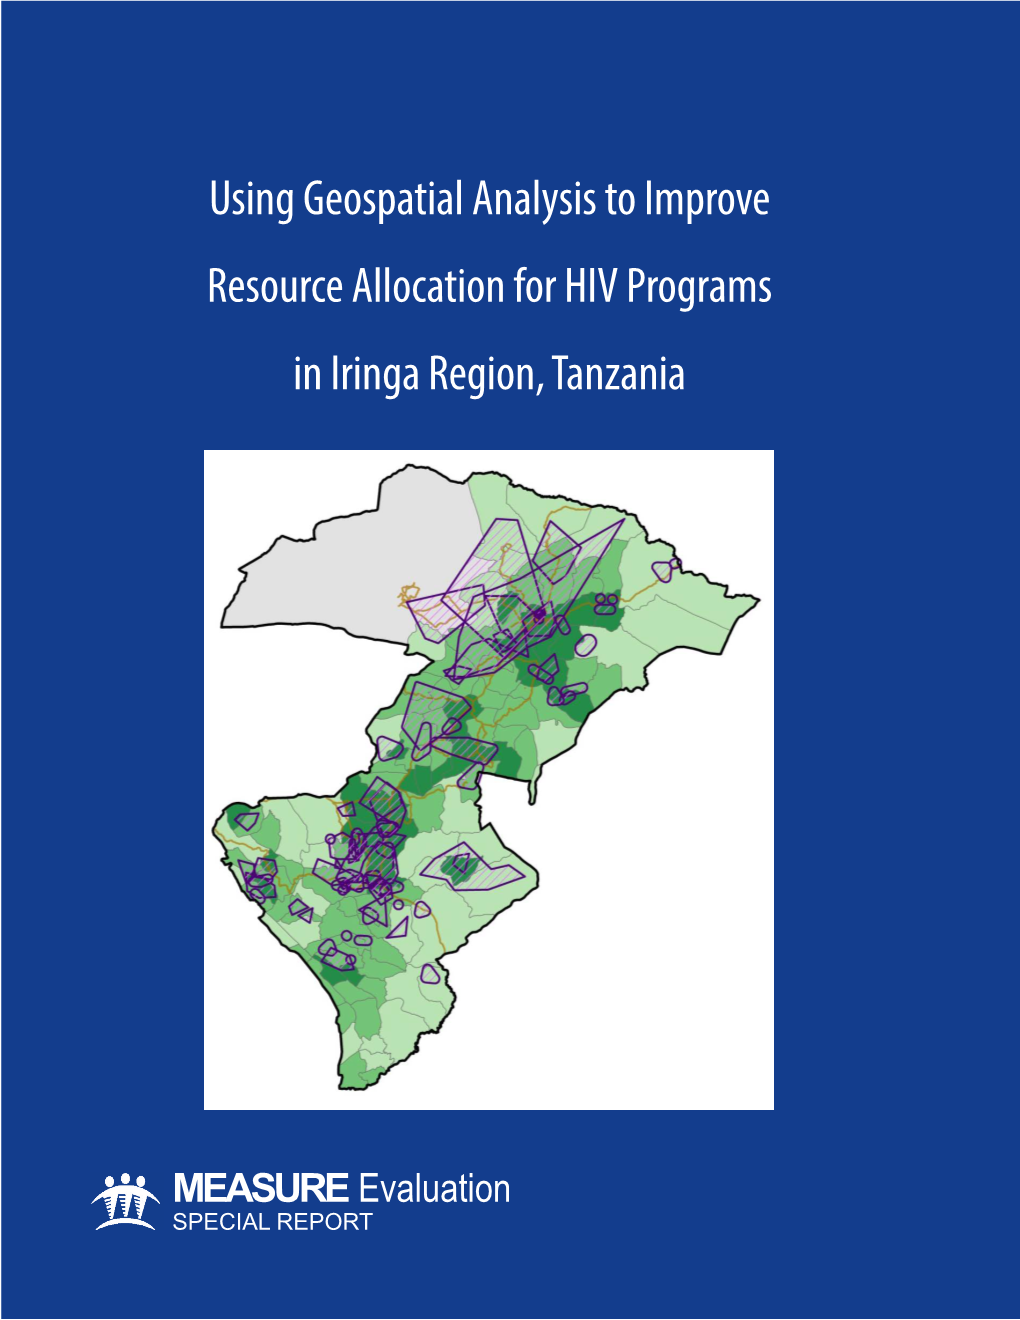 Mapping HIV Risks and Services in Iringa, Tanzania